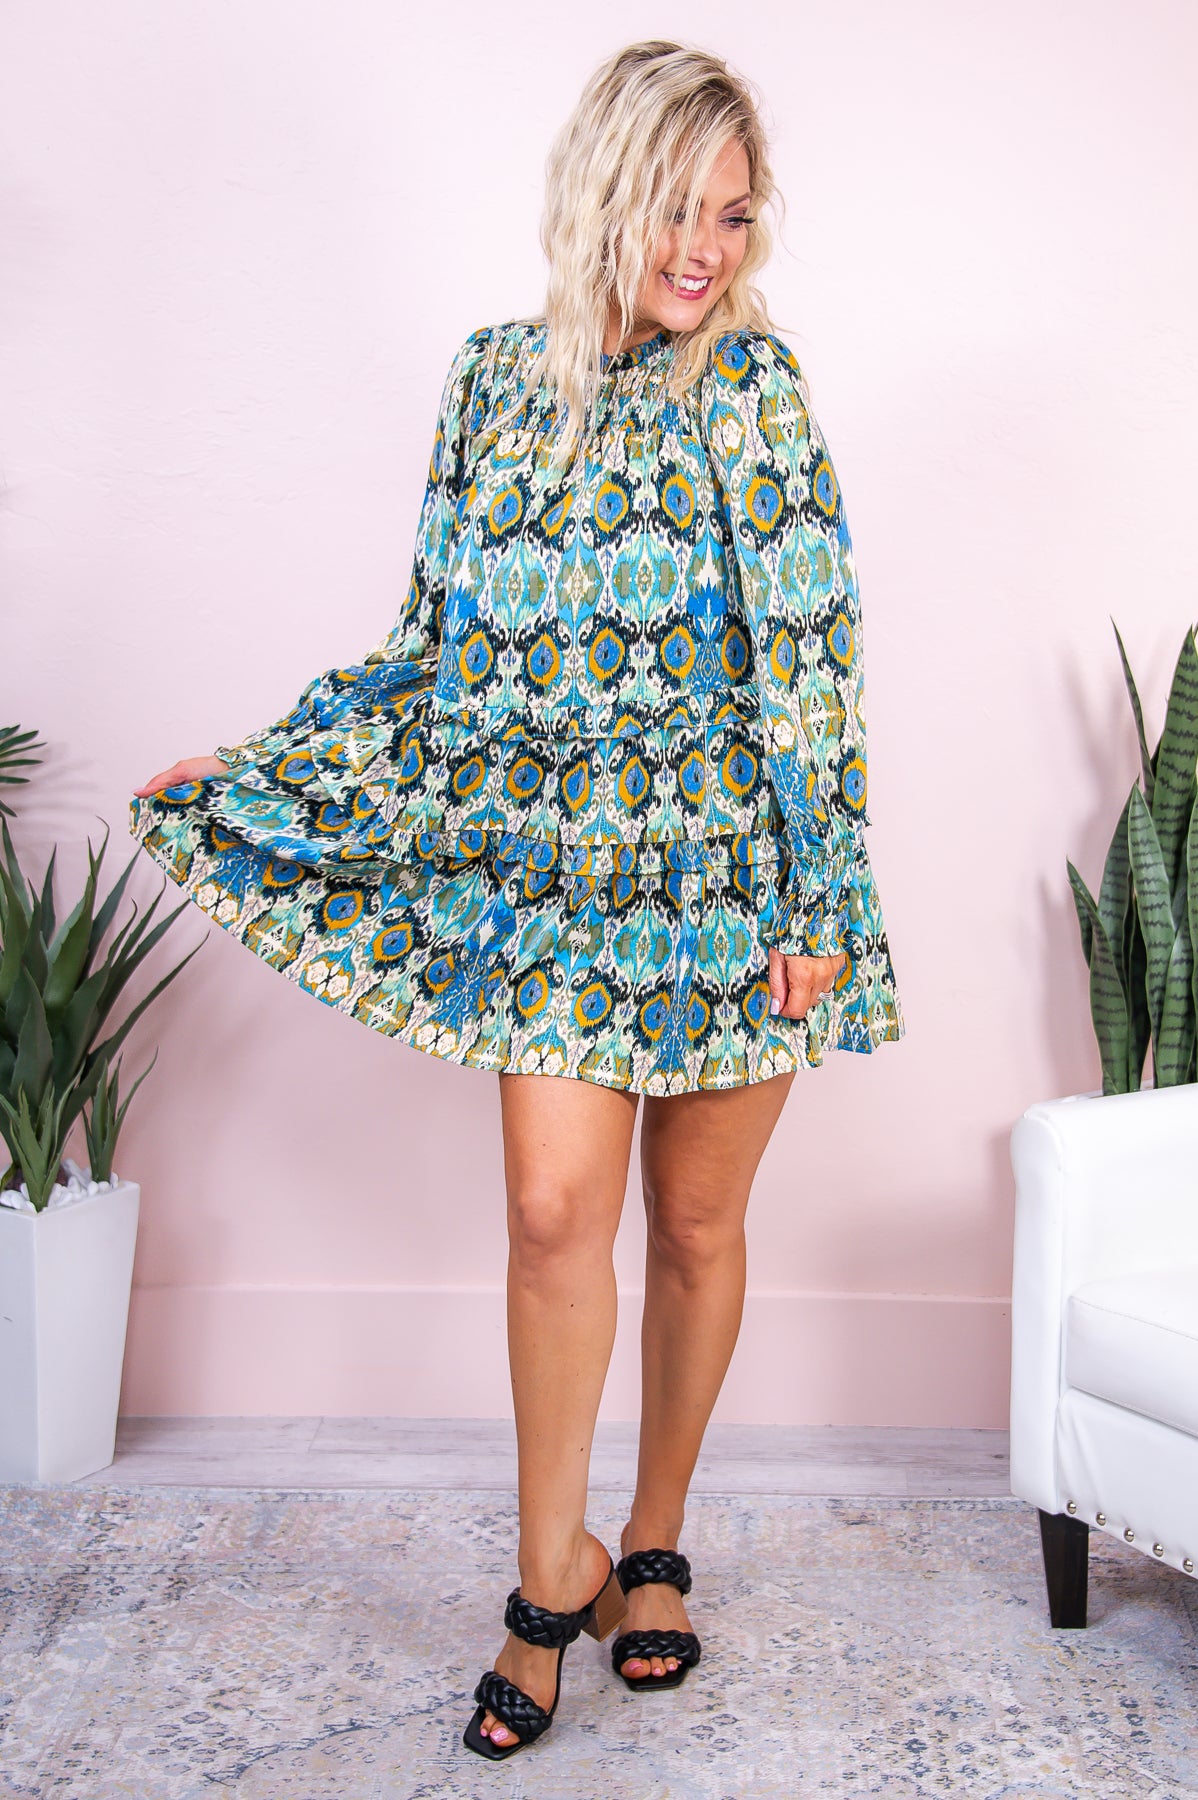 Go With The Flow Blue/Multi Color Printed Dress - D5005BL